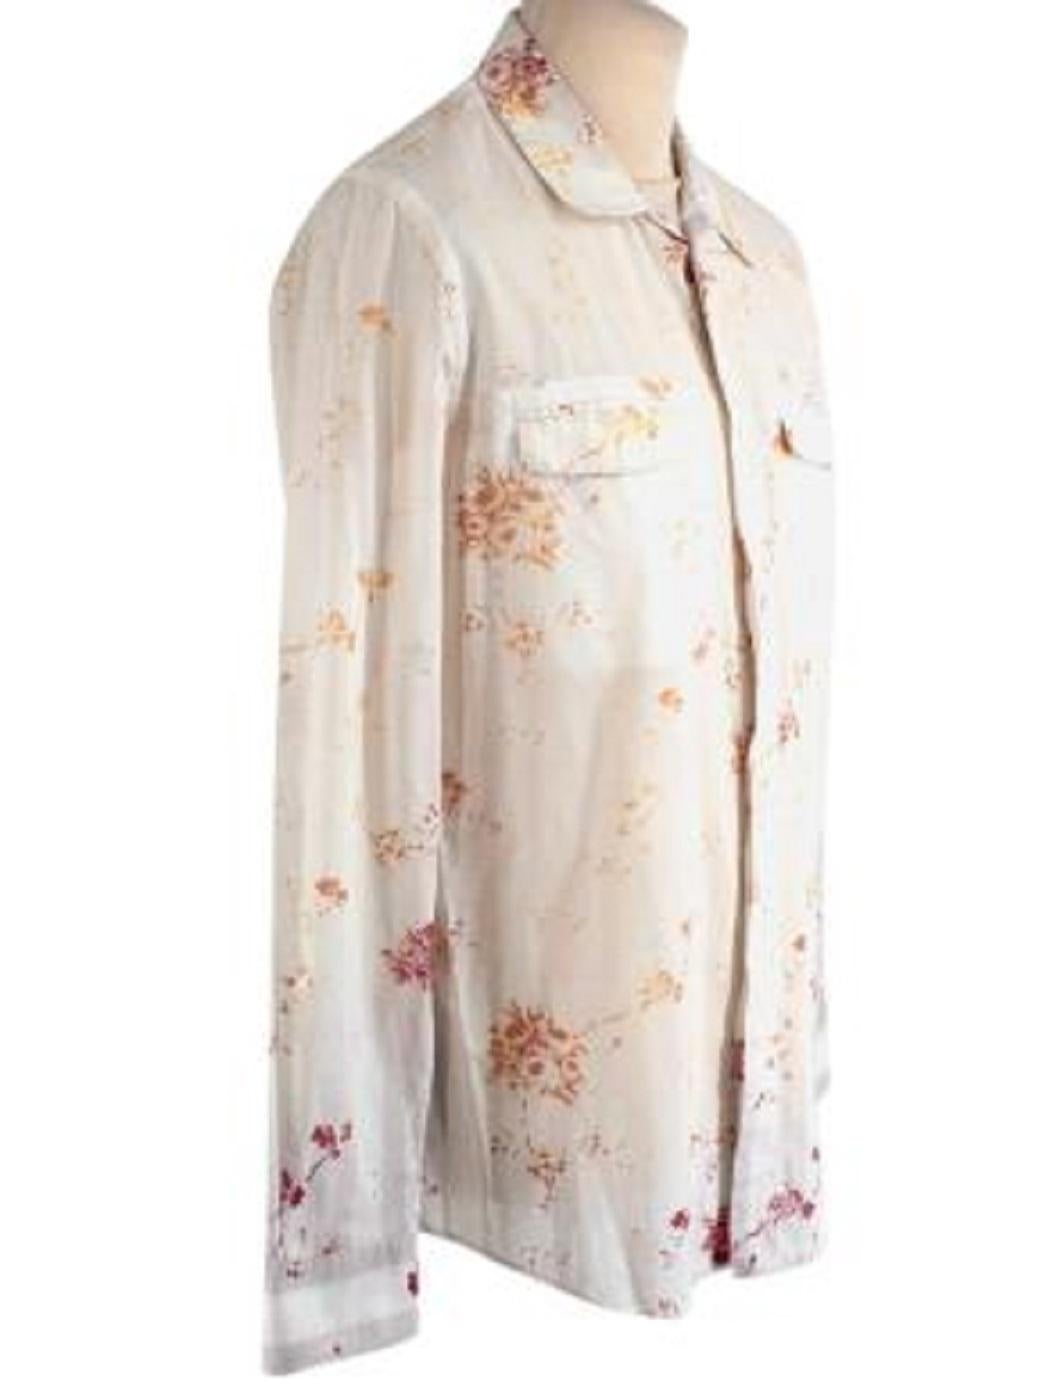 Maison Martin Margiela Floral Cotton Shirt

- Lightweight soft cotton. 
- Two sewn breast pockets.
- Buttoned cuffs
- Button Down
- Classic Fit

Made in Italy

PLEASE NOTE, THESE ITEMS ARE PRE-OWNED AND MAY SHOW SIGNS OF BEING STORED EVEN WHEN